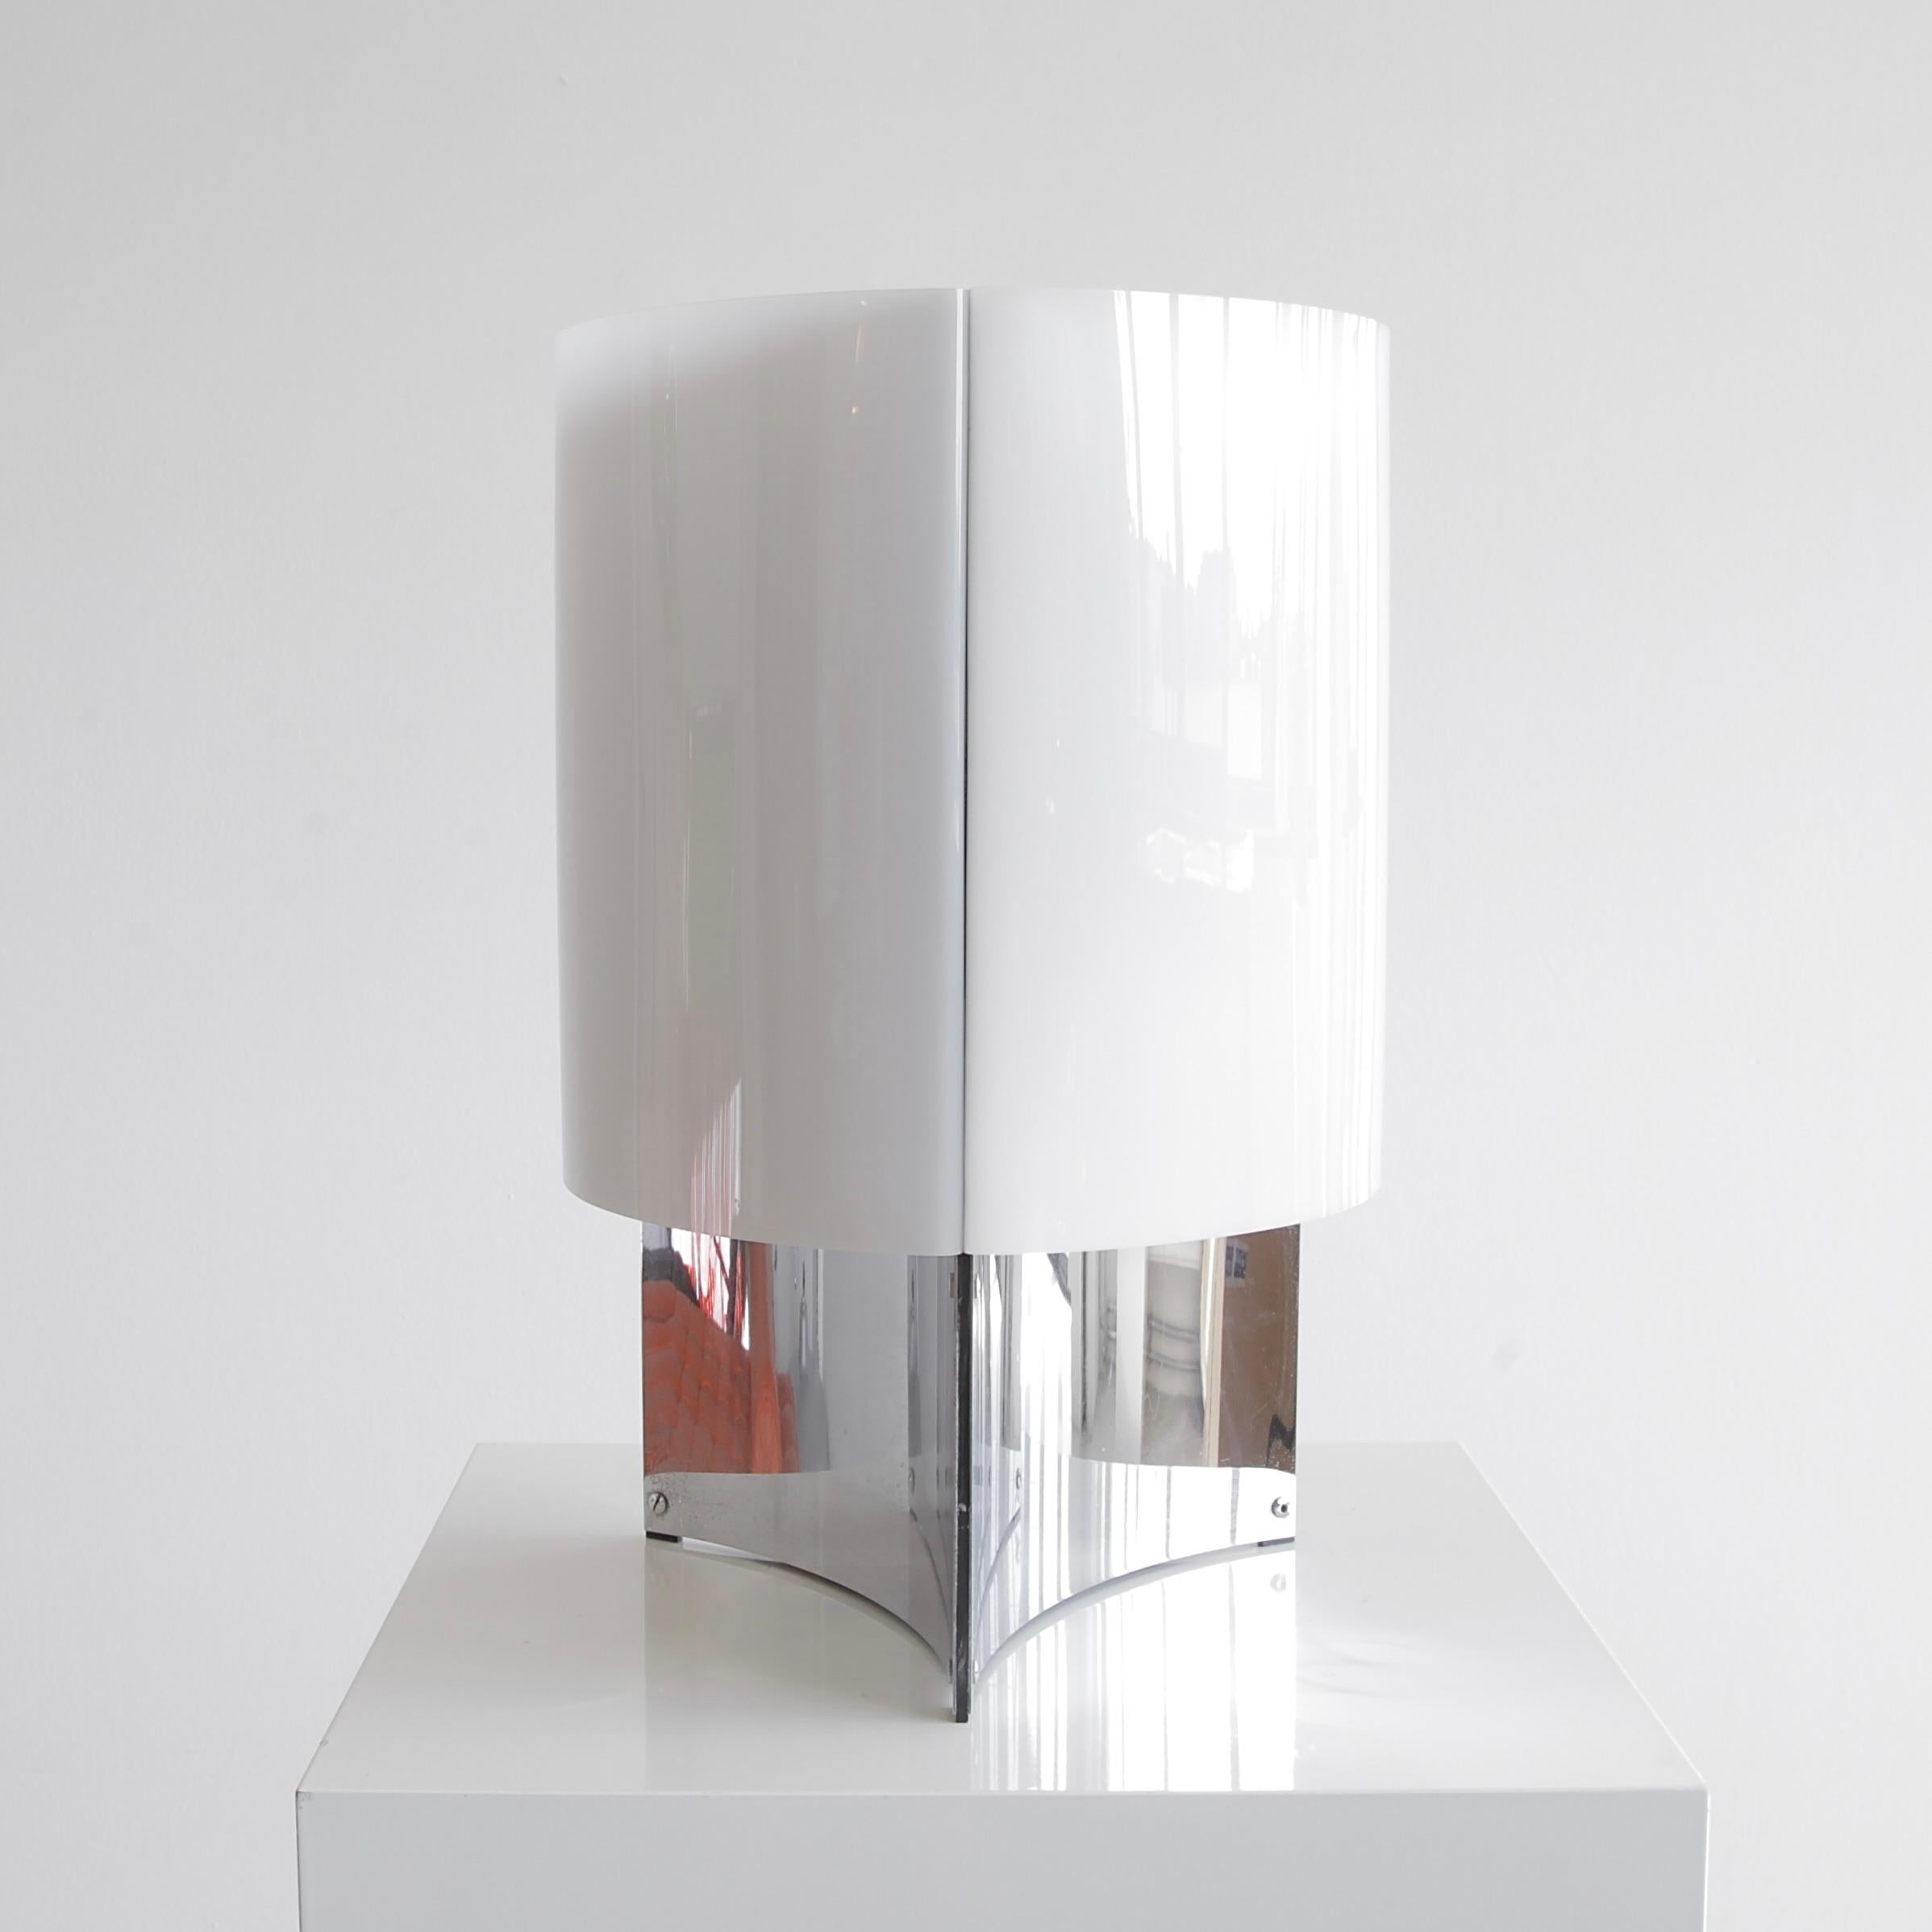 Table lamp 526, designed by Massimo Vignelli. Italy, Arteluce, 1965.

Chromed metal base with opaque perspex diffuser, divided into three sections. Includes 3 E14 light sockets.

Please note: All lighting fixtures will require a professional check